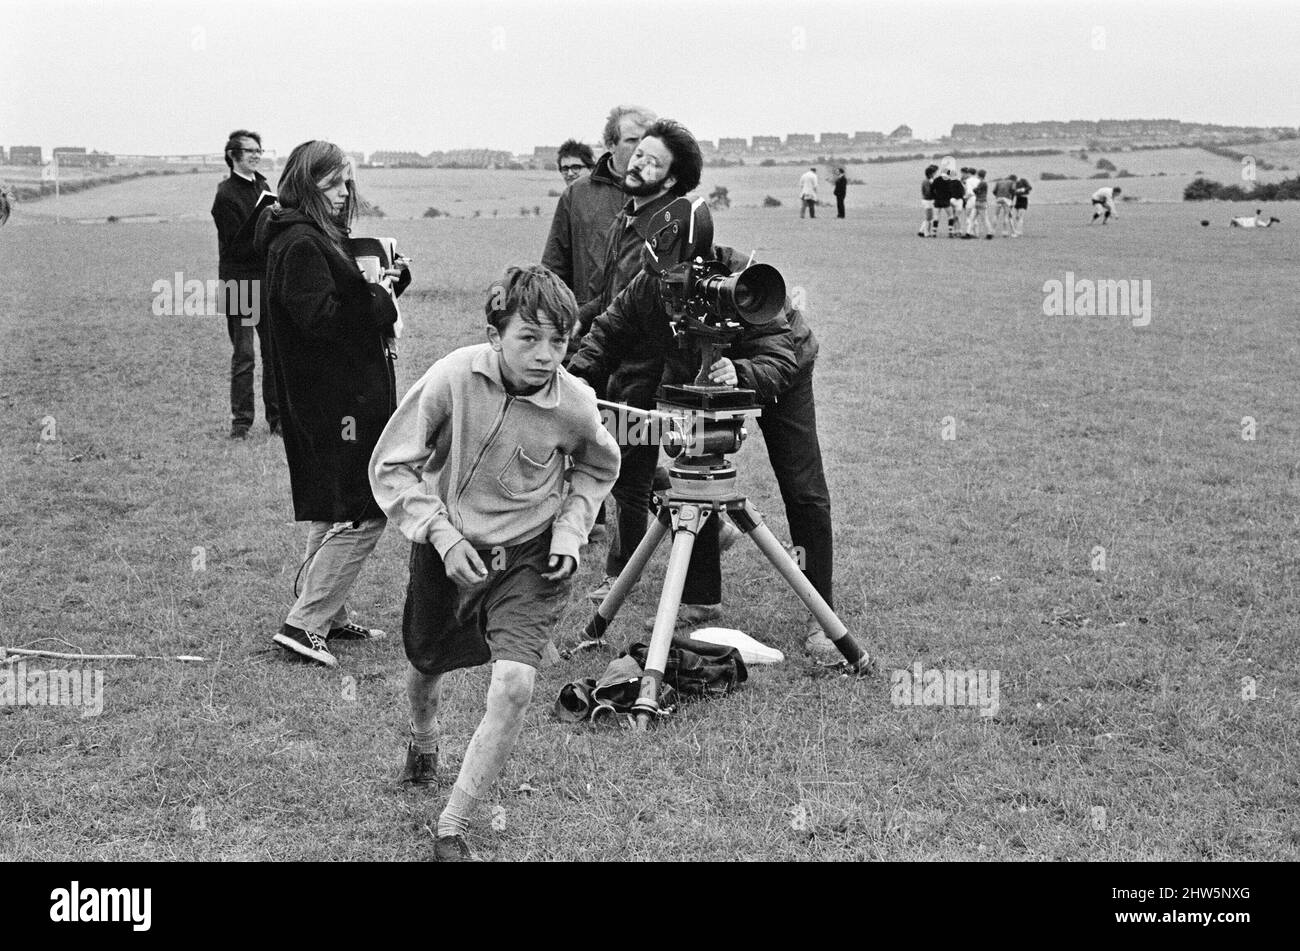 David Bradley, (aged 14) playing the part of Billy Casper, pictured with his Kestral, on the film set of the film Kes.   Here Billy Casper is running to play a football scene after talking with the film crew at the school playing field. Kes is a 1969 release drama film directed by Ken Loach and produced by Tony Garnett. The film is based on the 1968 novel A Kestrel for a Knave, written by the Barnsley-born author Barry Hines. The film is ranked seventh in the British Film Institute's Top Ten (British) Films and among the top ten in its list of the 50 films you should see by the age of 14. Stock Photo